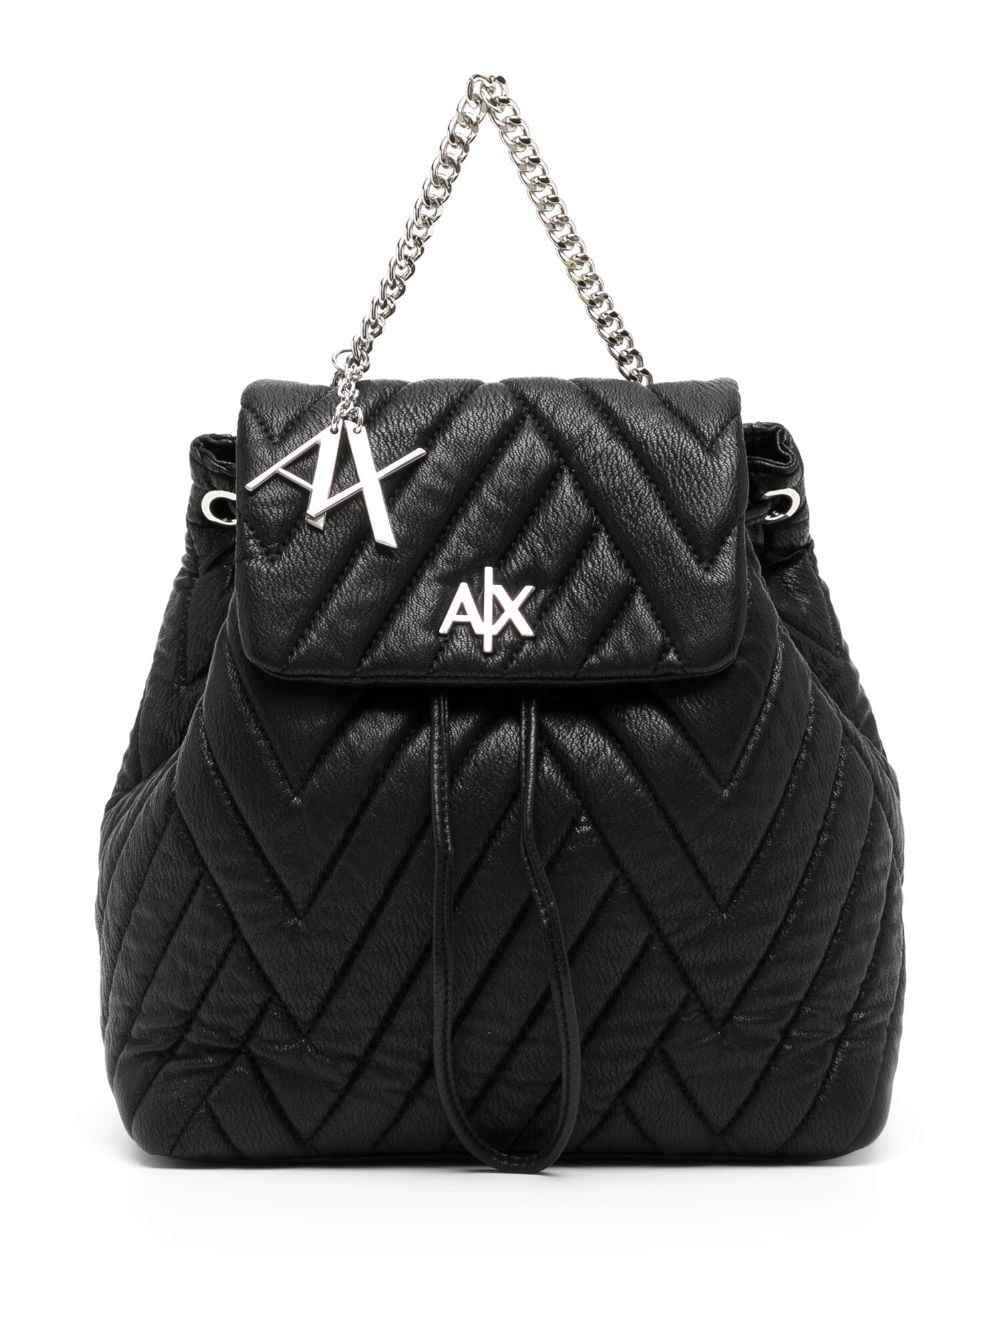 ARMANI EXCHANGE Quilted Crossbody Bag with Chain Strap & AX Charm For Women (Pink, OS)